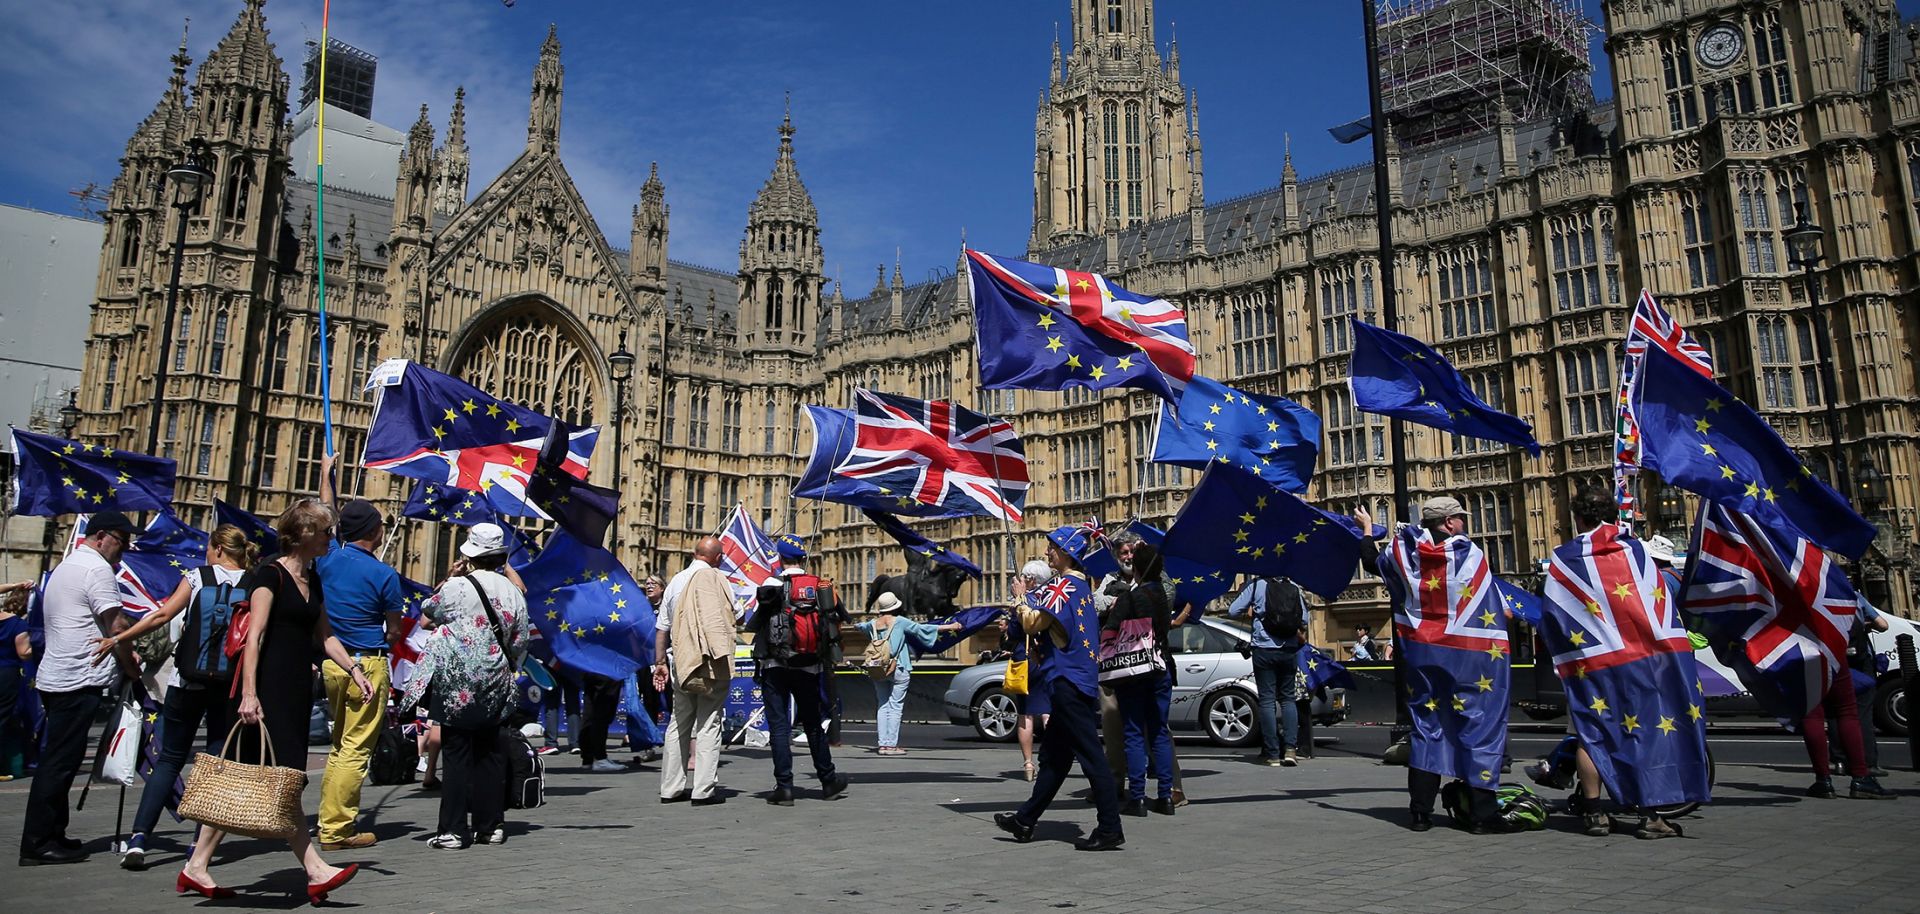 Pro-EU demonstrators hold placards and wave flags as they protest against Brexit, outside of the Houses of Parliament in central London on June 11, 2018.